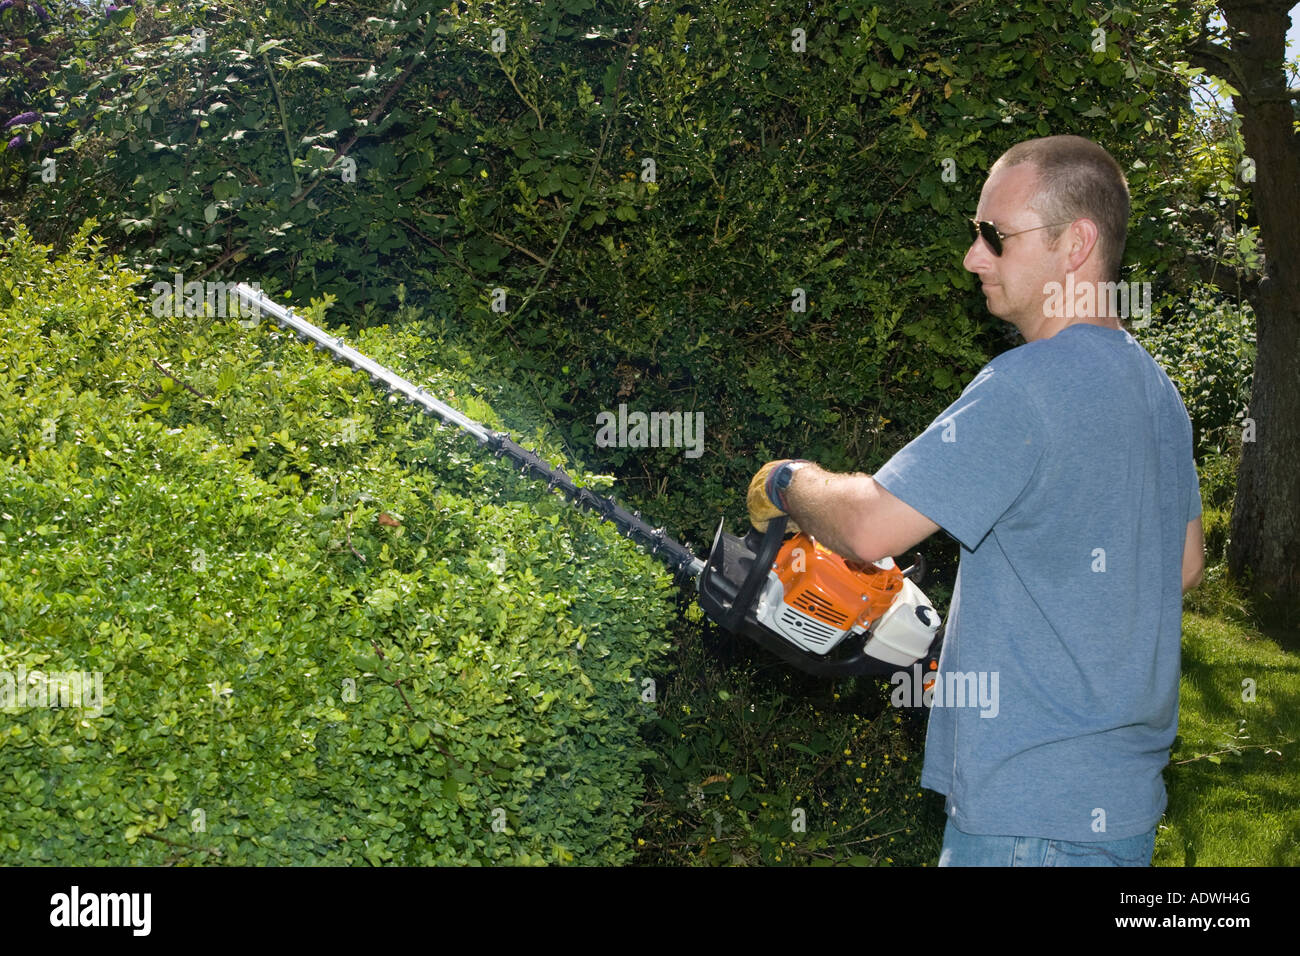 a man using a hedge trimmer Stock Photo